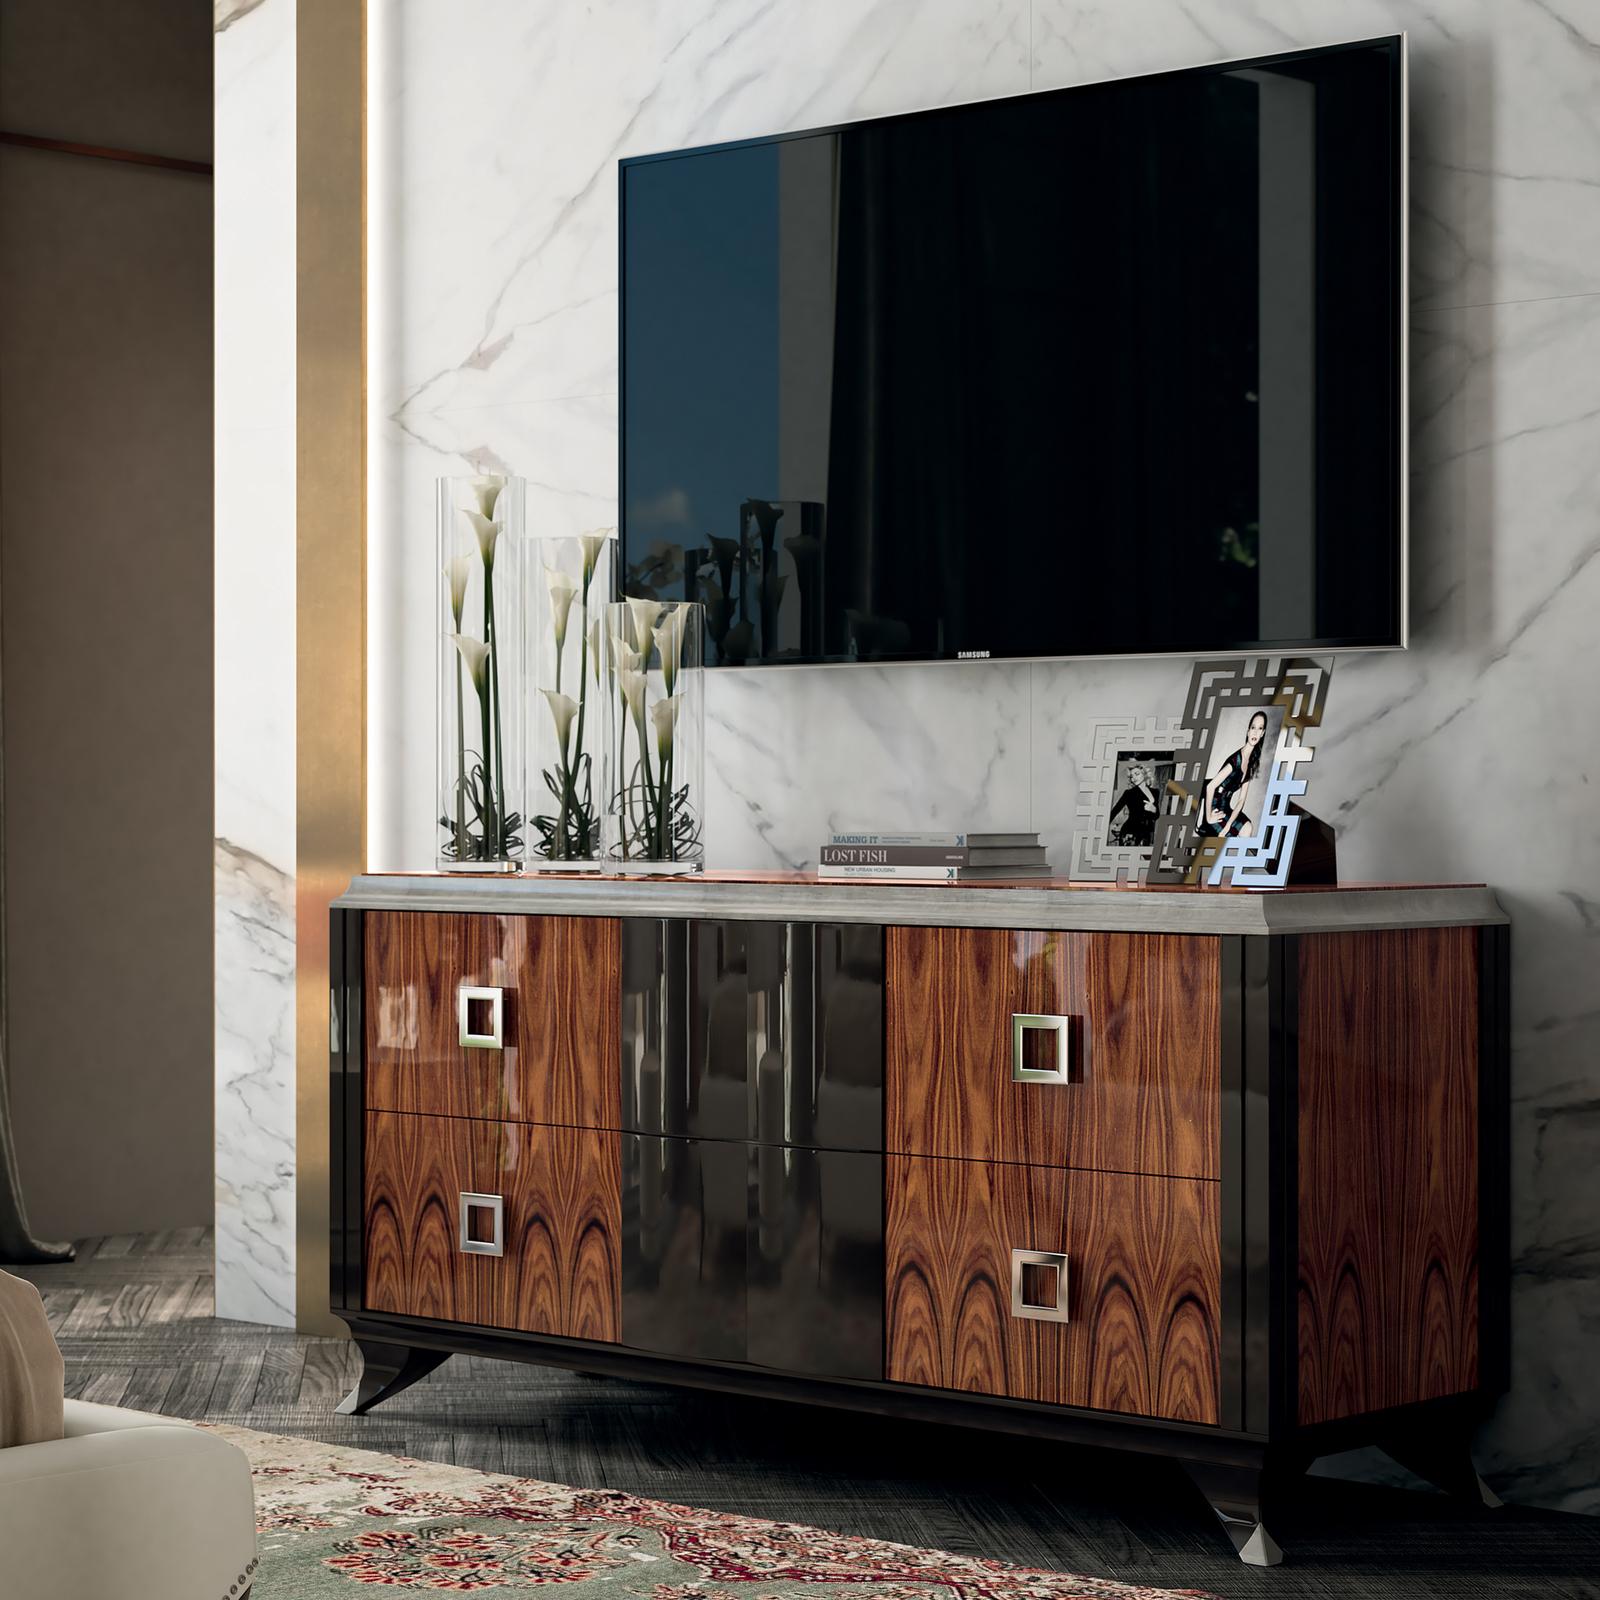 Captivating and stylish, this item in the new Oscar collection, the chest of 4 drawers, boasts a bold yet elegant design with elements of Santos rosewood that will adapt to any decor with a contemporary, cosmopolitan flavor. The splendid polished